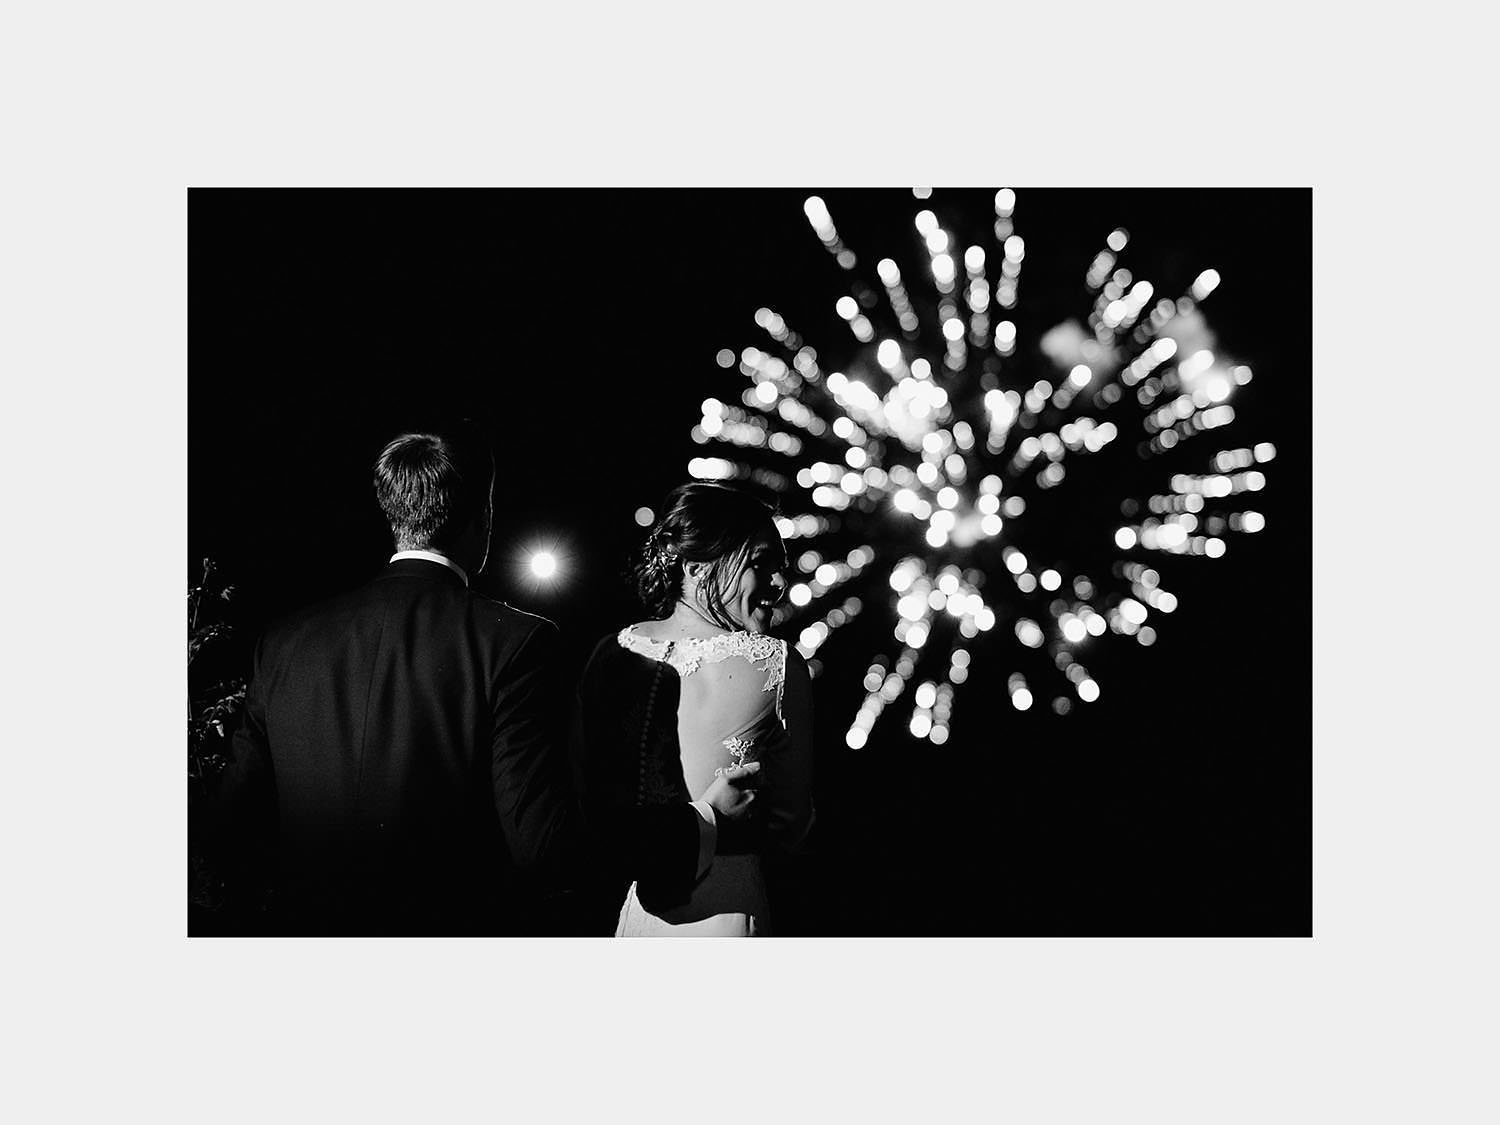 relaxing countryside wedding in tuscany bride groom celebrating with fireworks